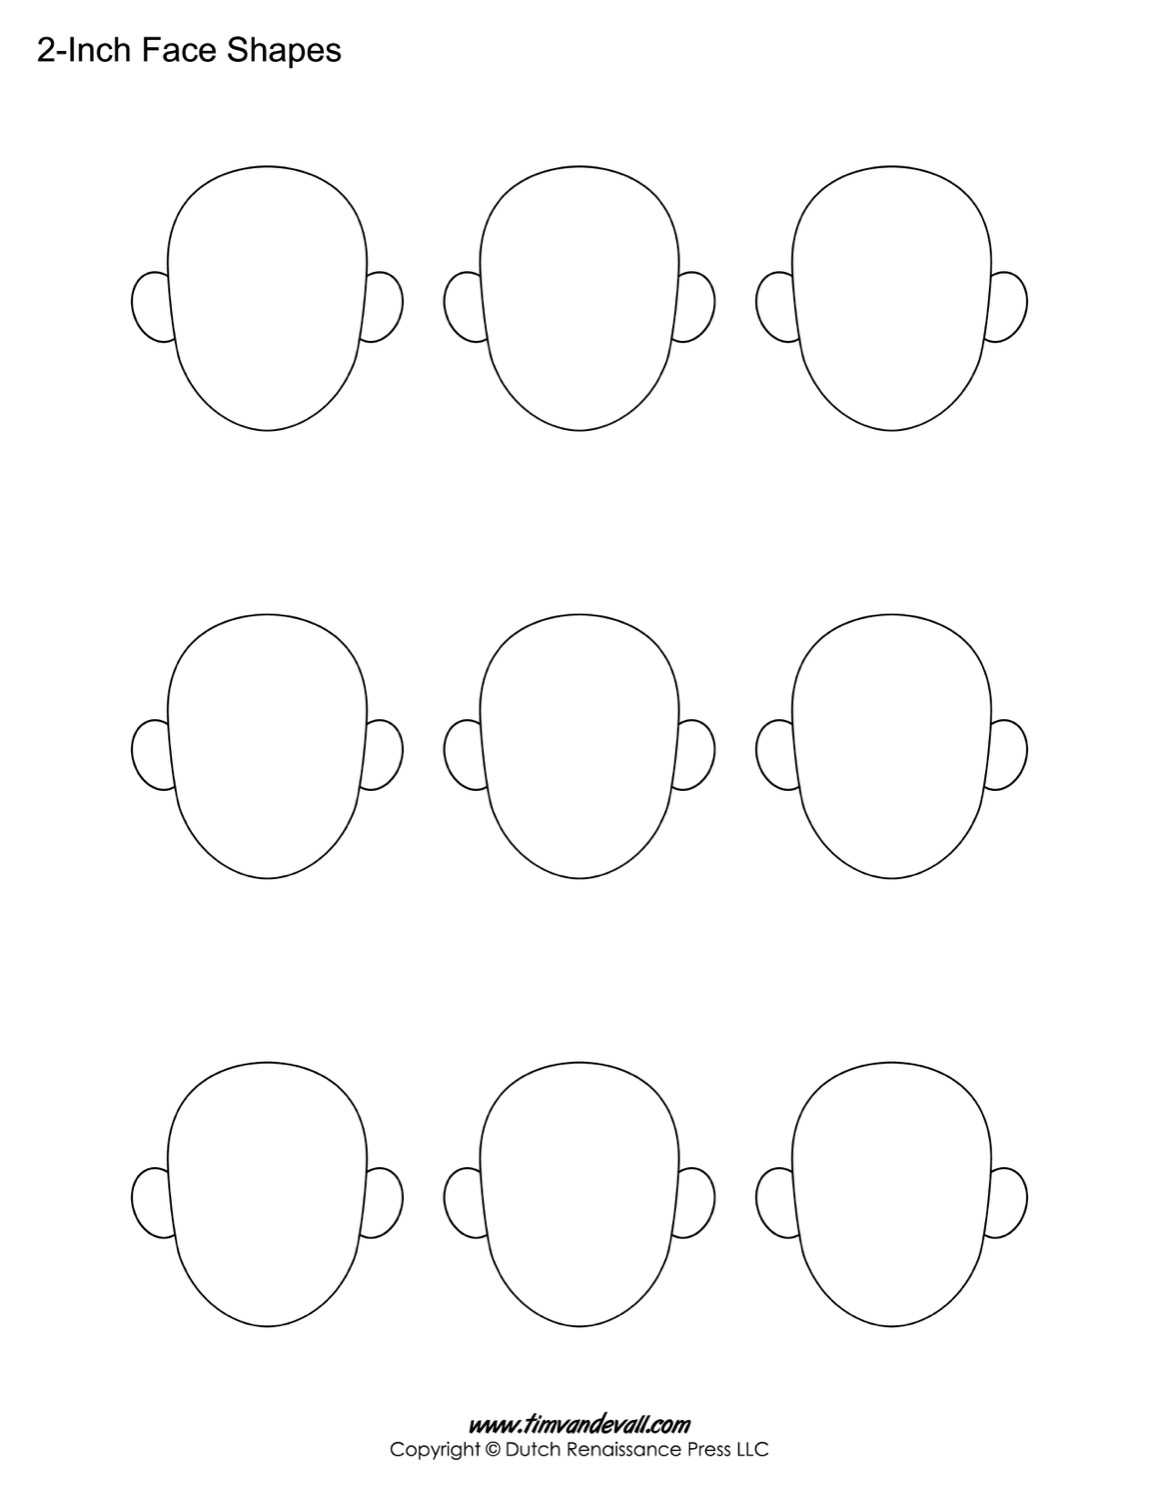 Blank Face Templates | Printable Face Shapes For Kids Throughout Blank Face Template Preschool